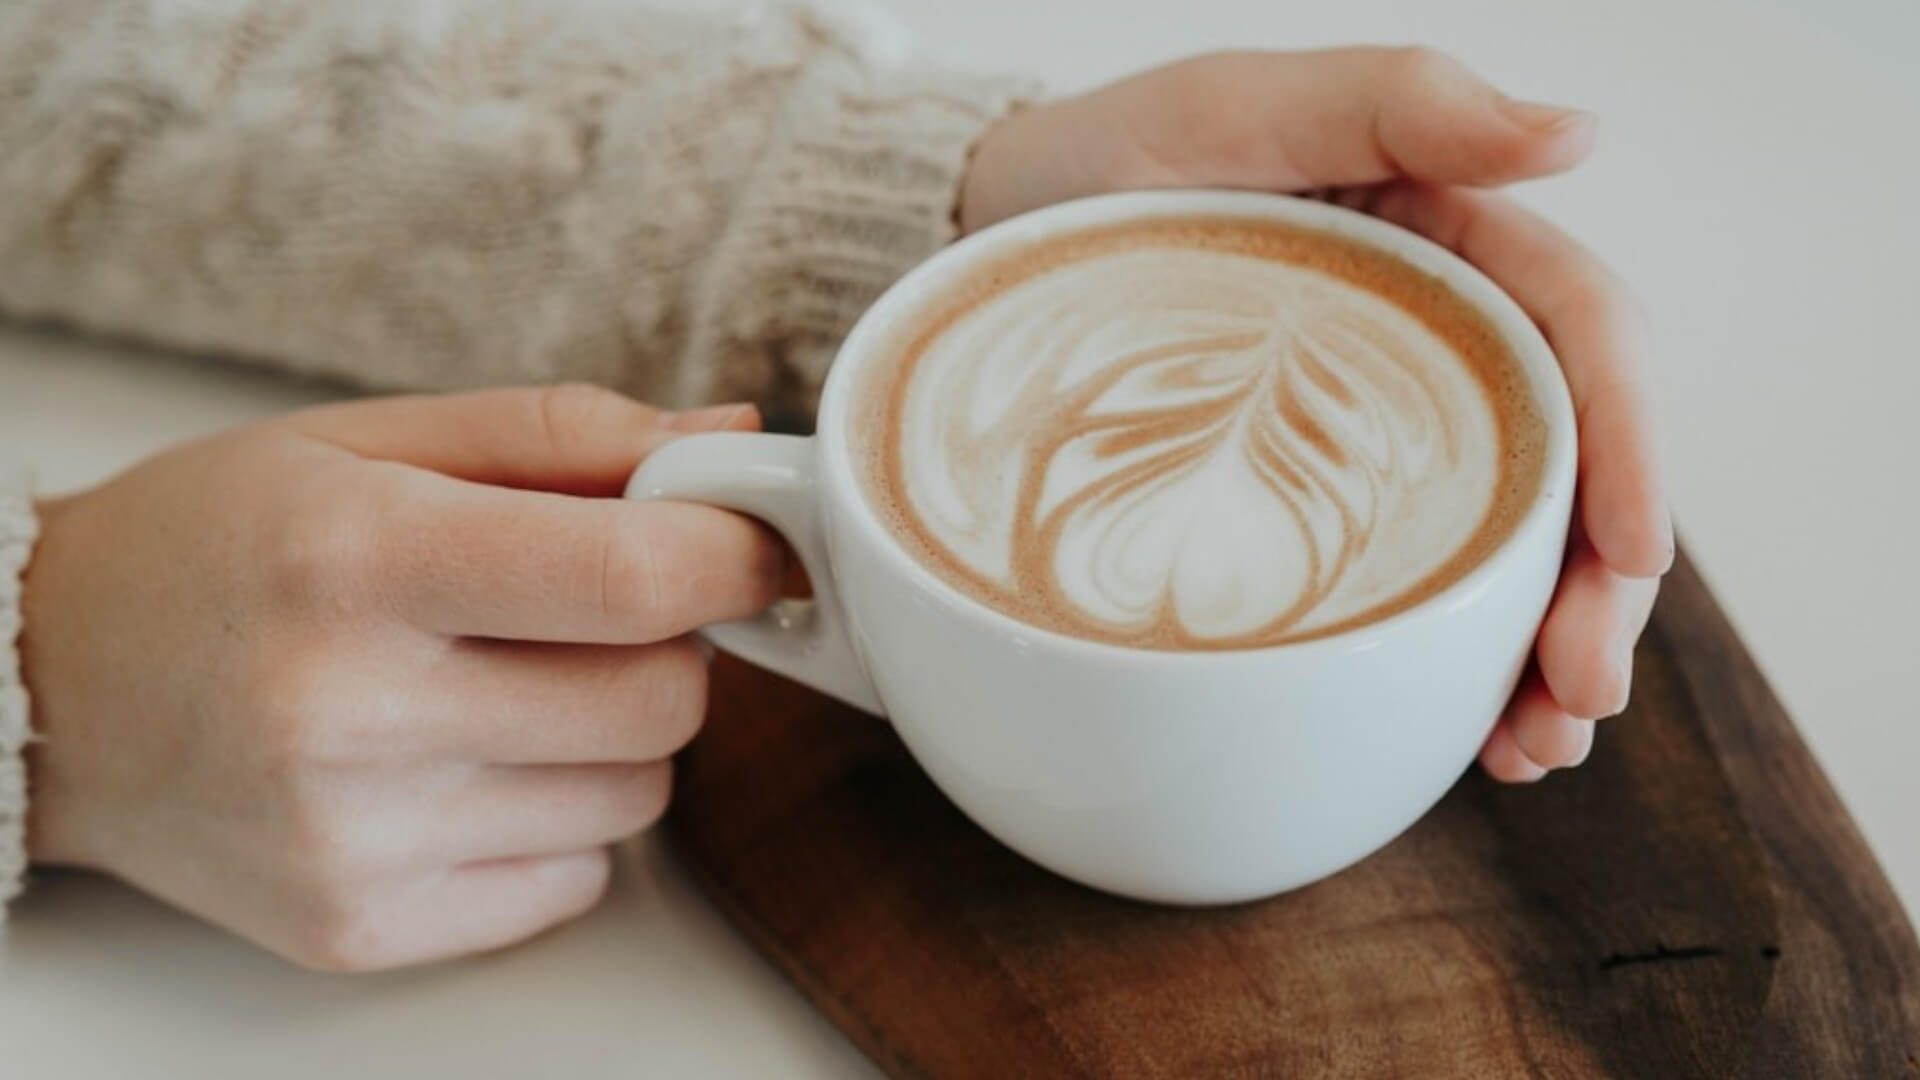 All Your Coffee Questions Answered by a Coffee Expert